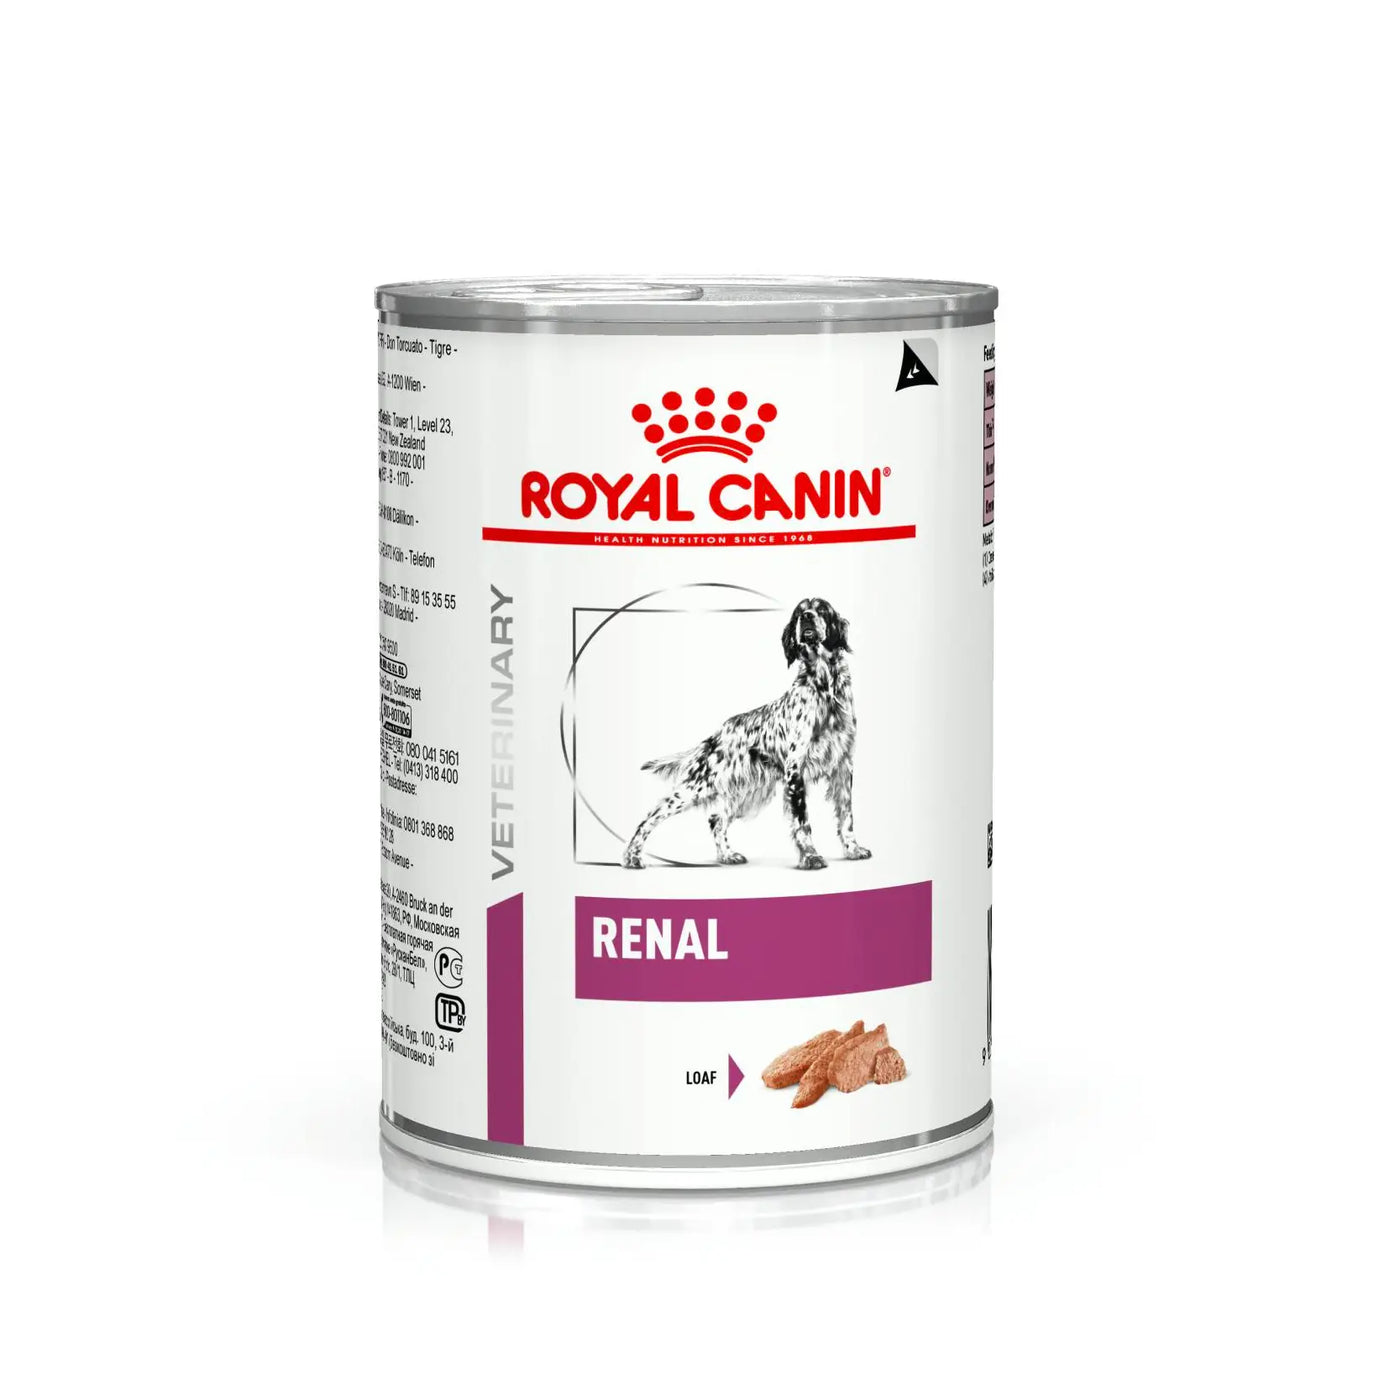 Royal Canin - Canine Renal 410g